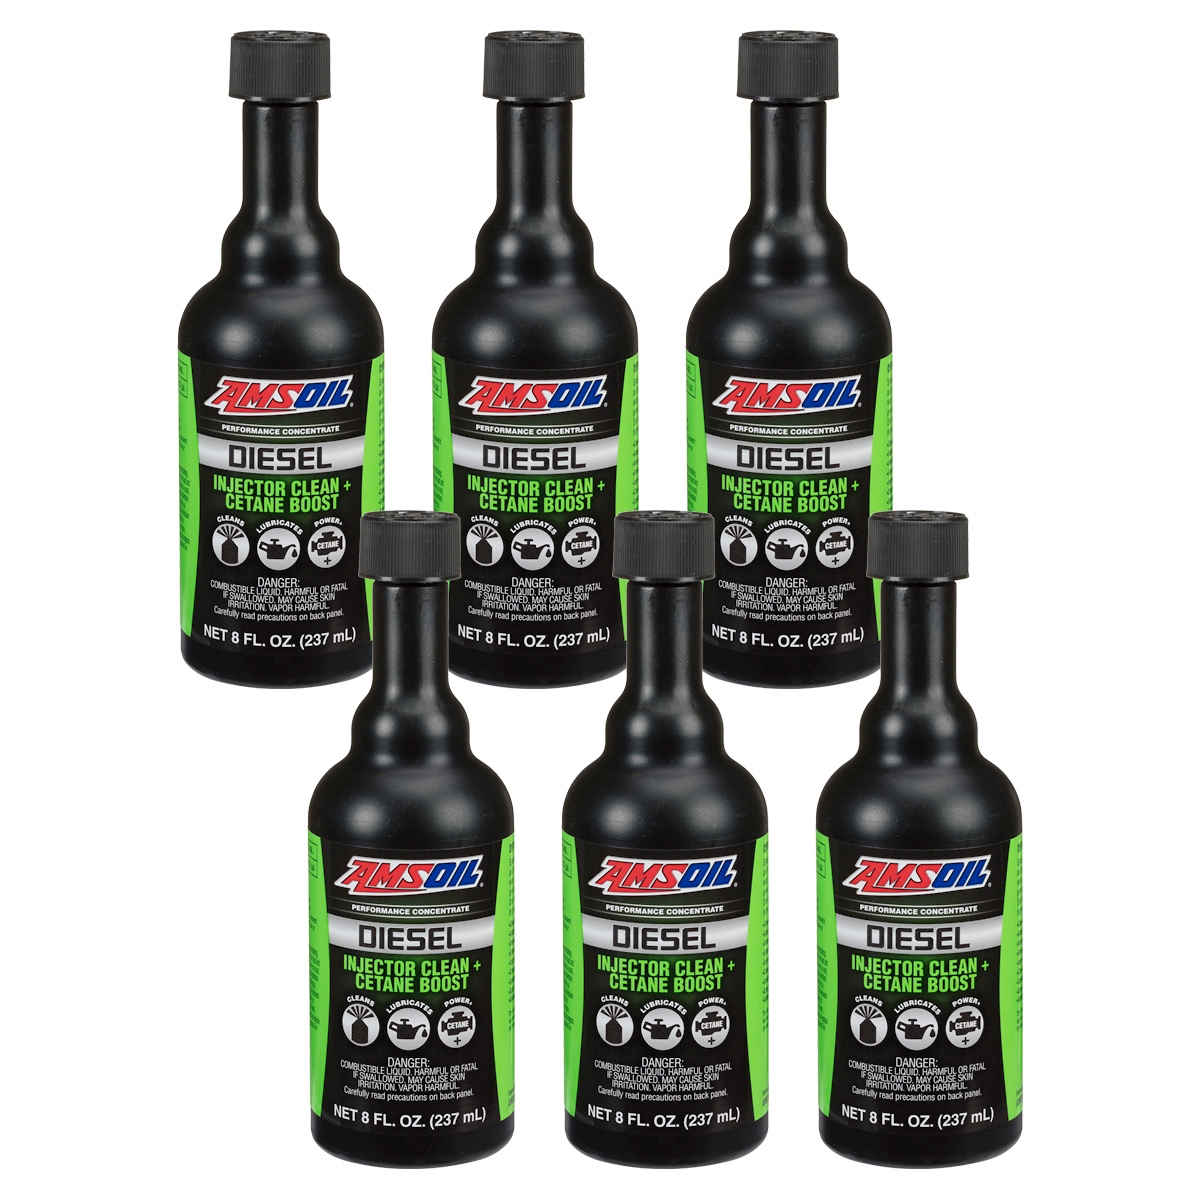 Amsoil ADS Diesel Injector Cleaner and cetane booster 8 oz bottles